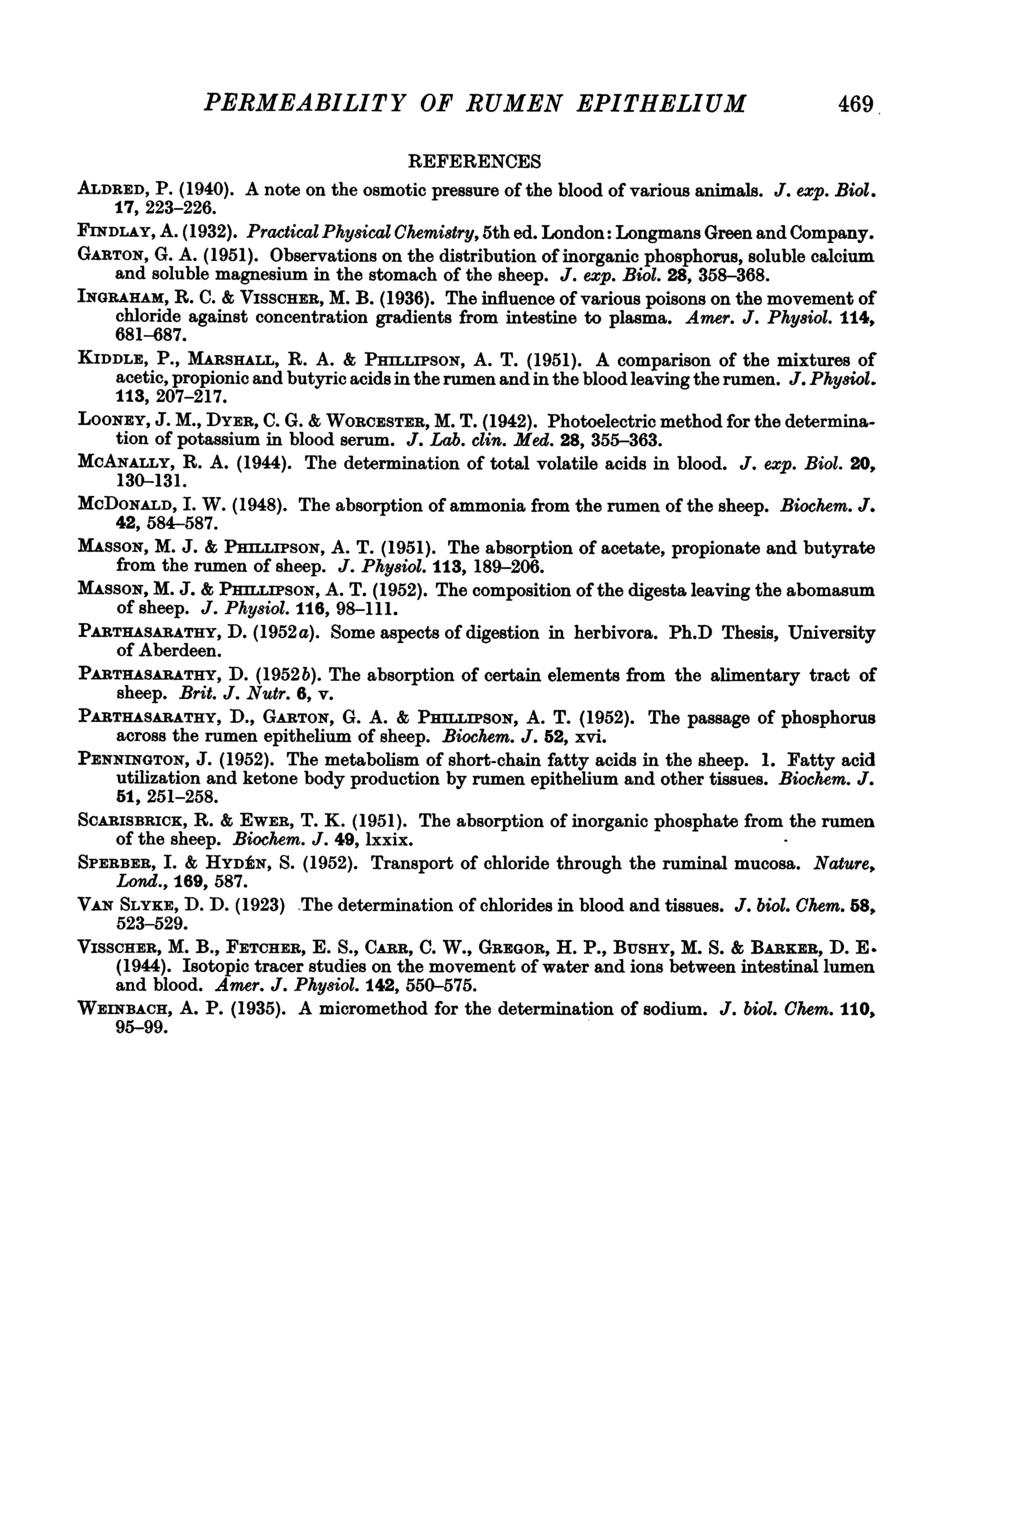 PERMEABILITY OF RUMEN EPITHELIUM 469 REFERENCES ALDRED, P. (1940). A note on the osmotic pressure of the blood of various animals. J. exp. Biol. 17, 223-226. FINDLAY, A. (1932).